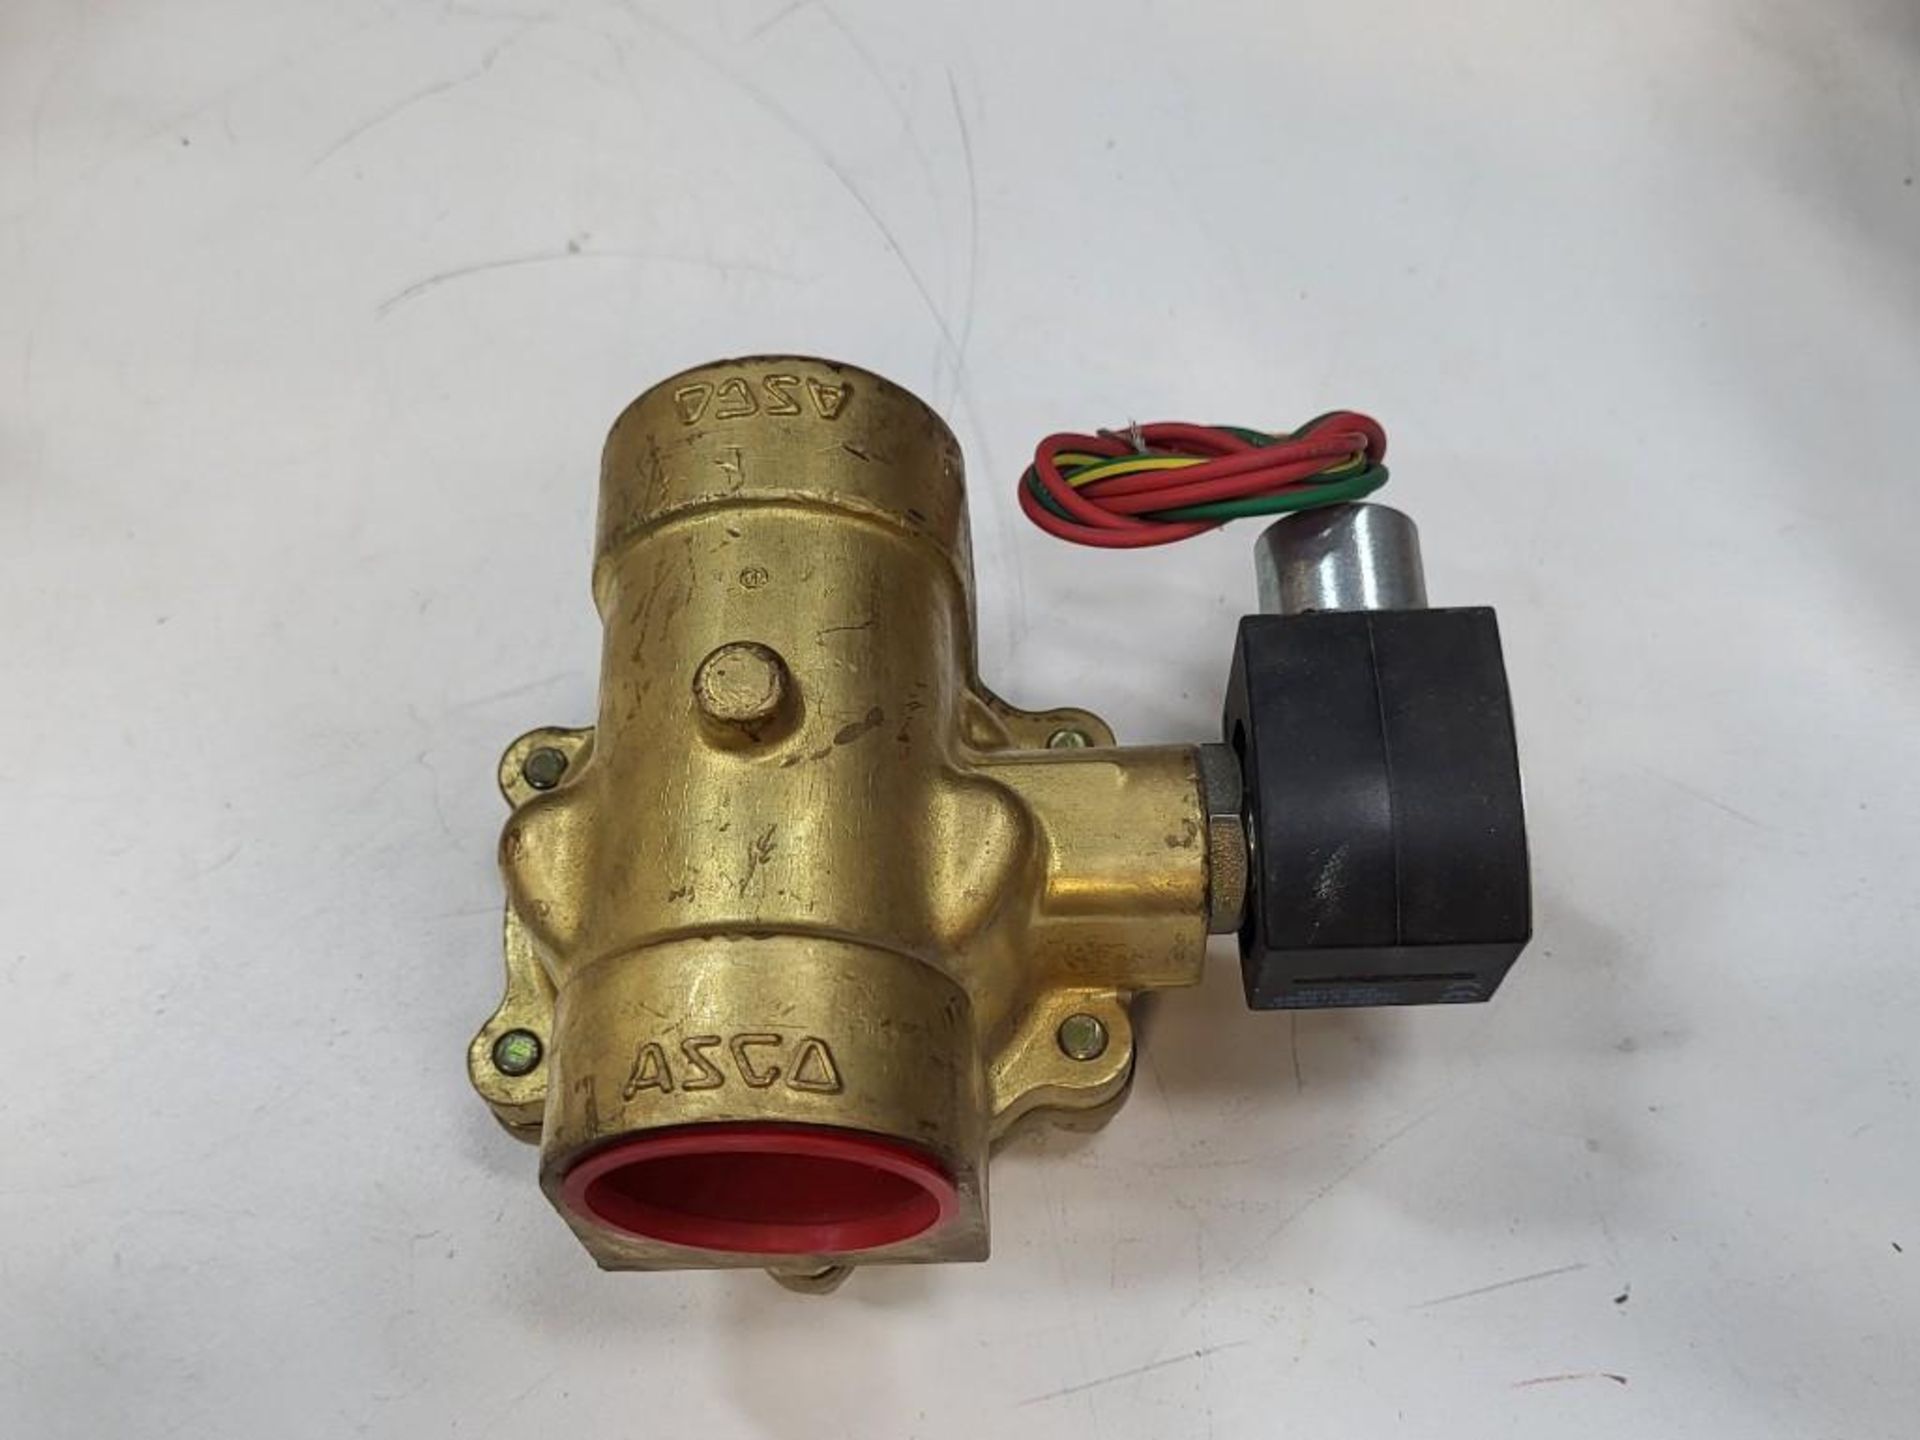 New In Box ASCO General Service 2-Way Solenoid Valve 1-1/2" - Image 2 of 4